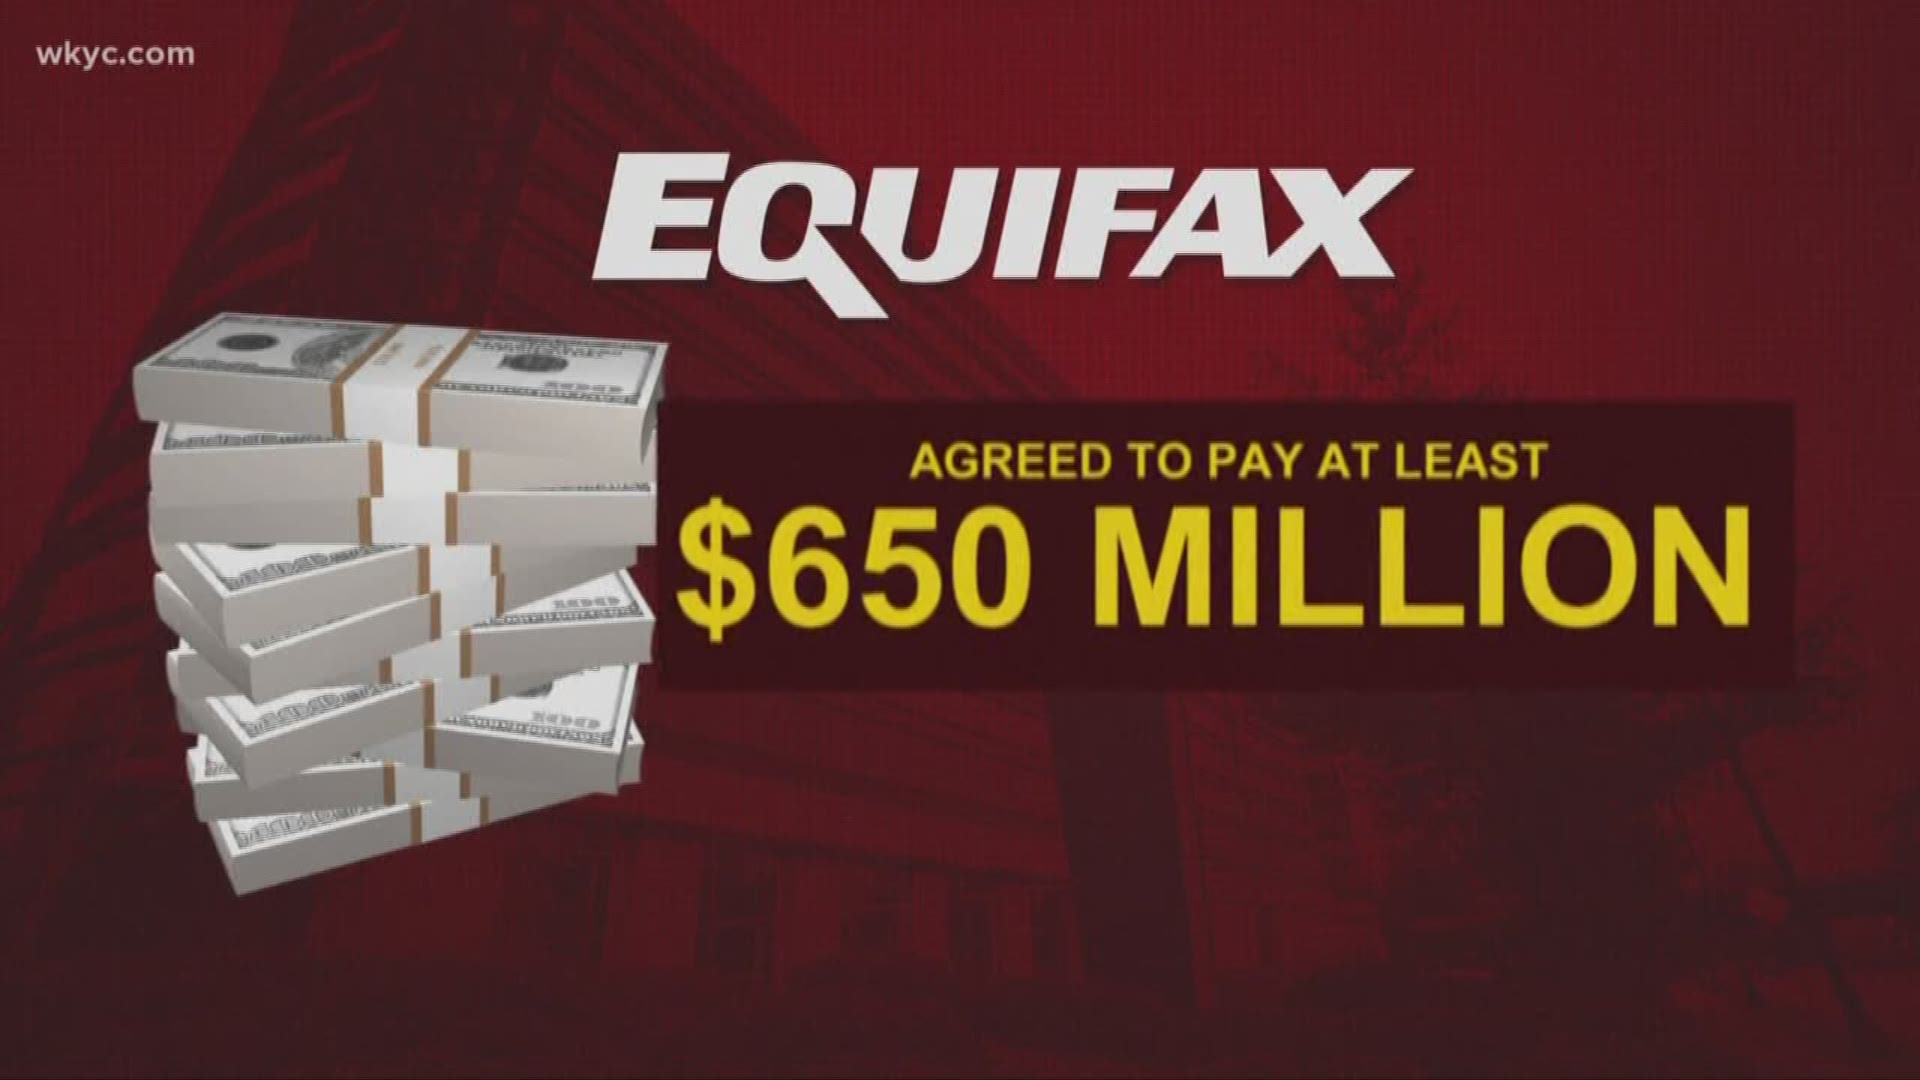 Equifax will pay at least $650 million in settlement